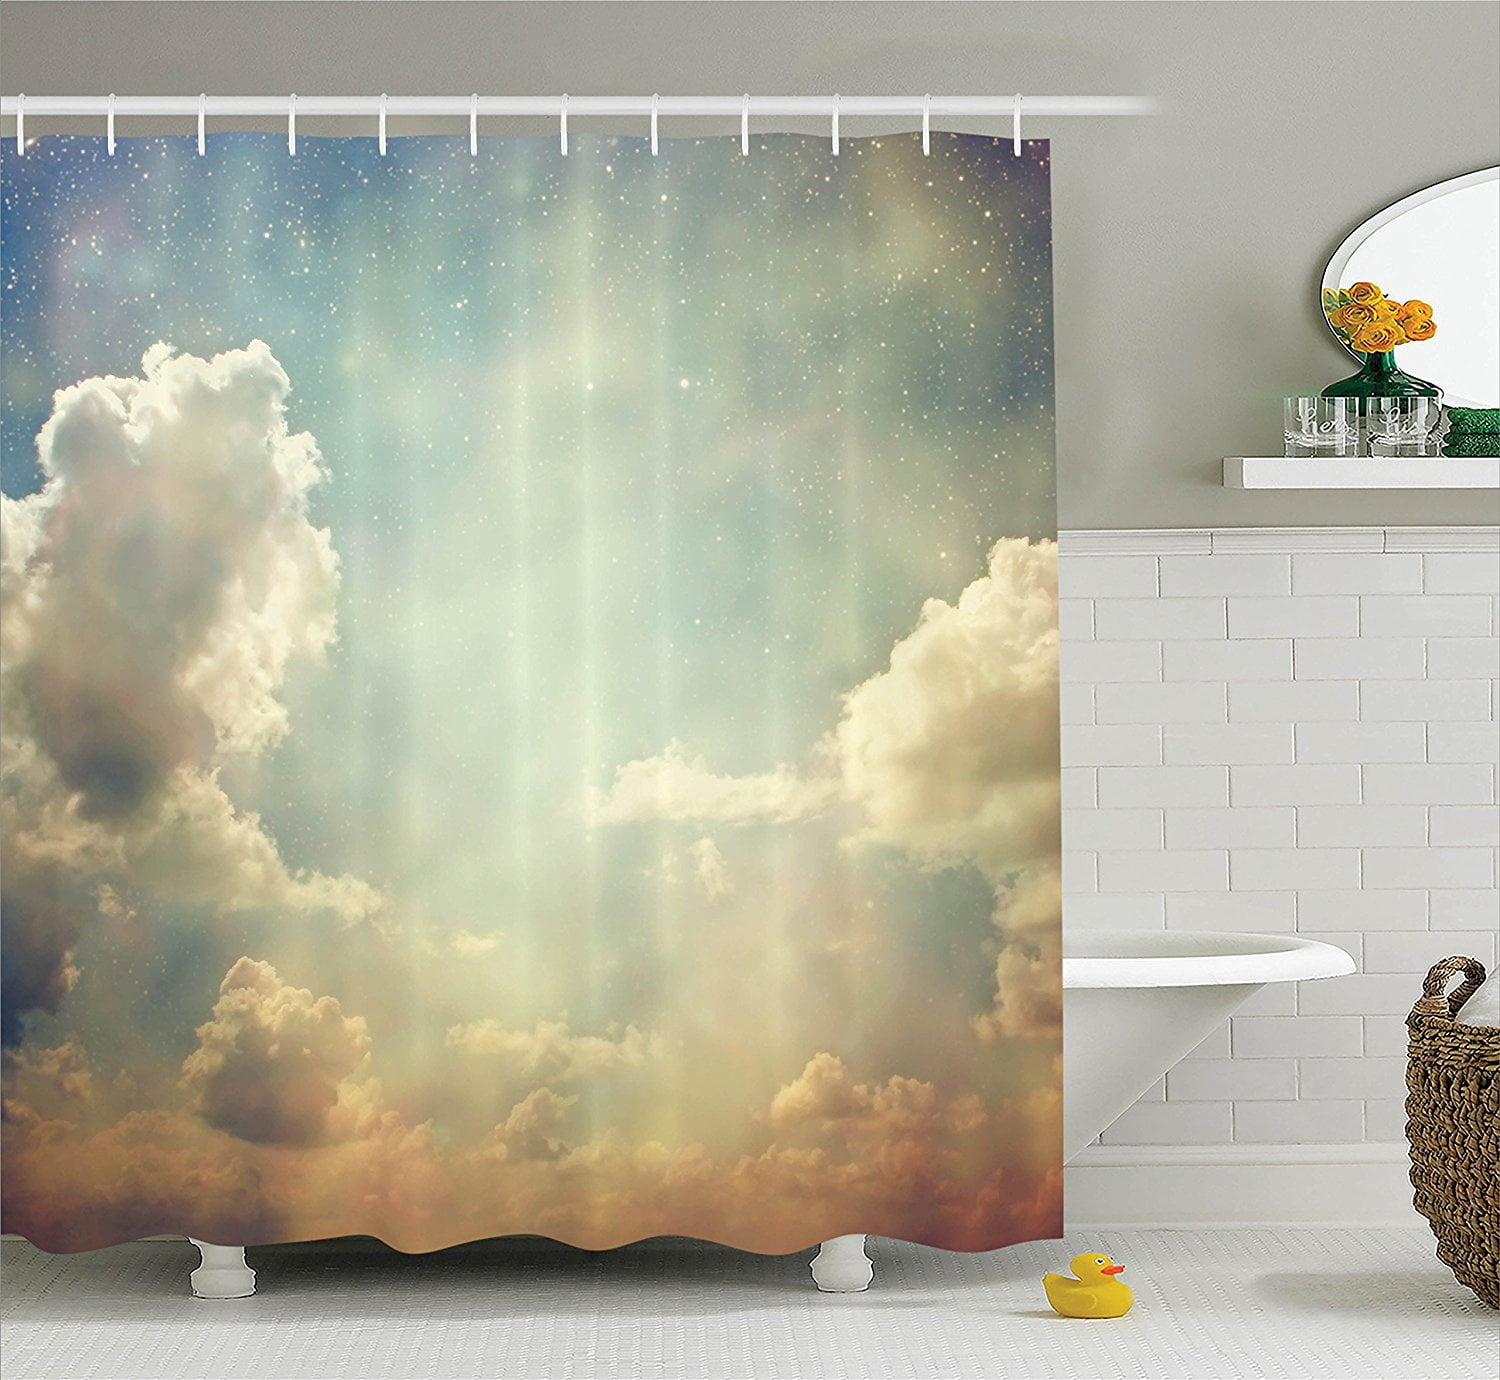 Details about   Big City In The Sunset Fabric Bathroom Shower Curtains & Hooks 71x71" 